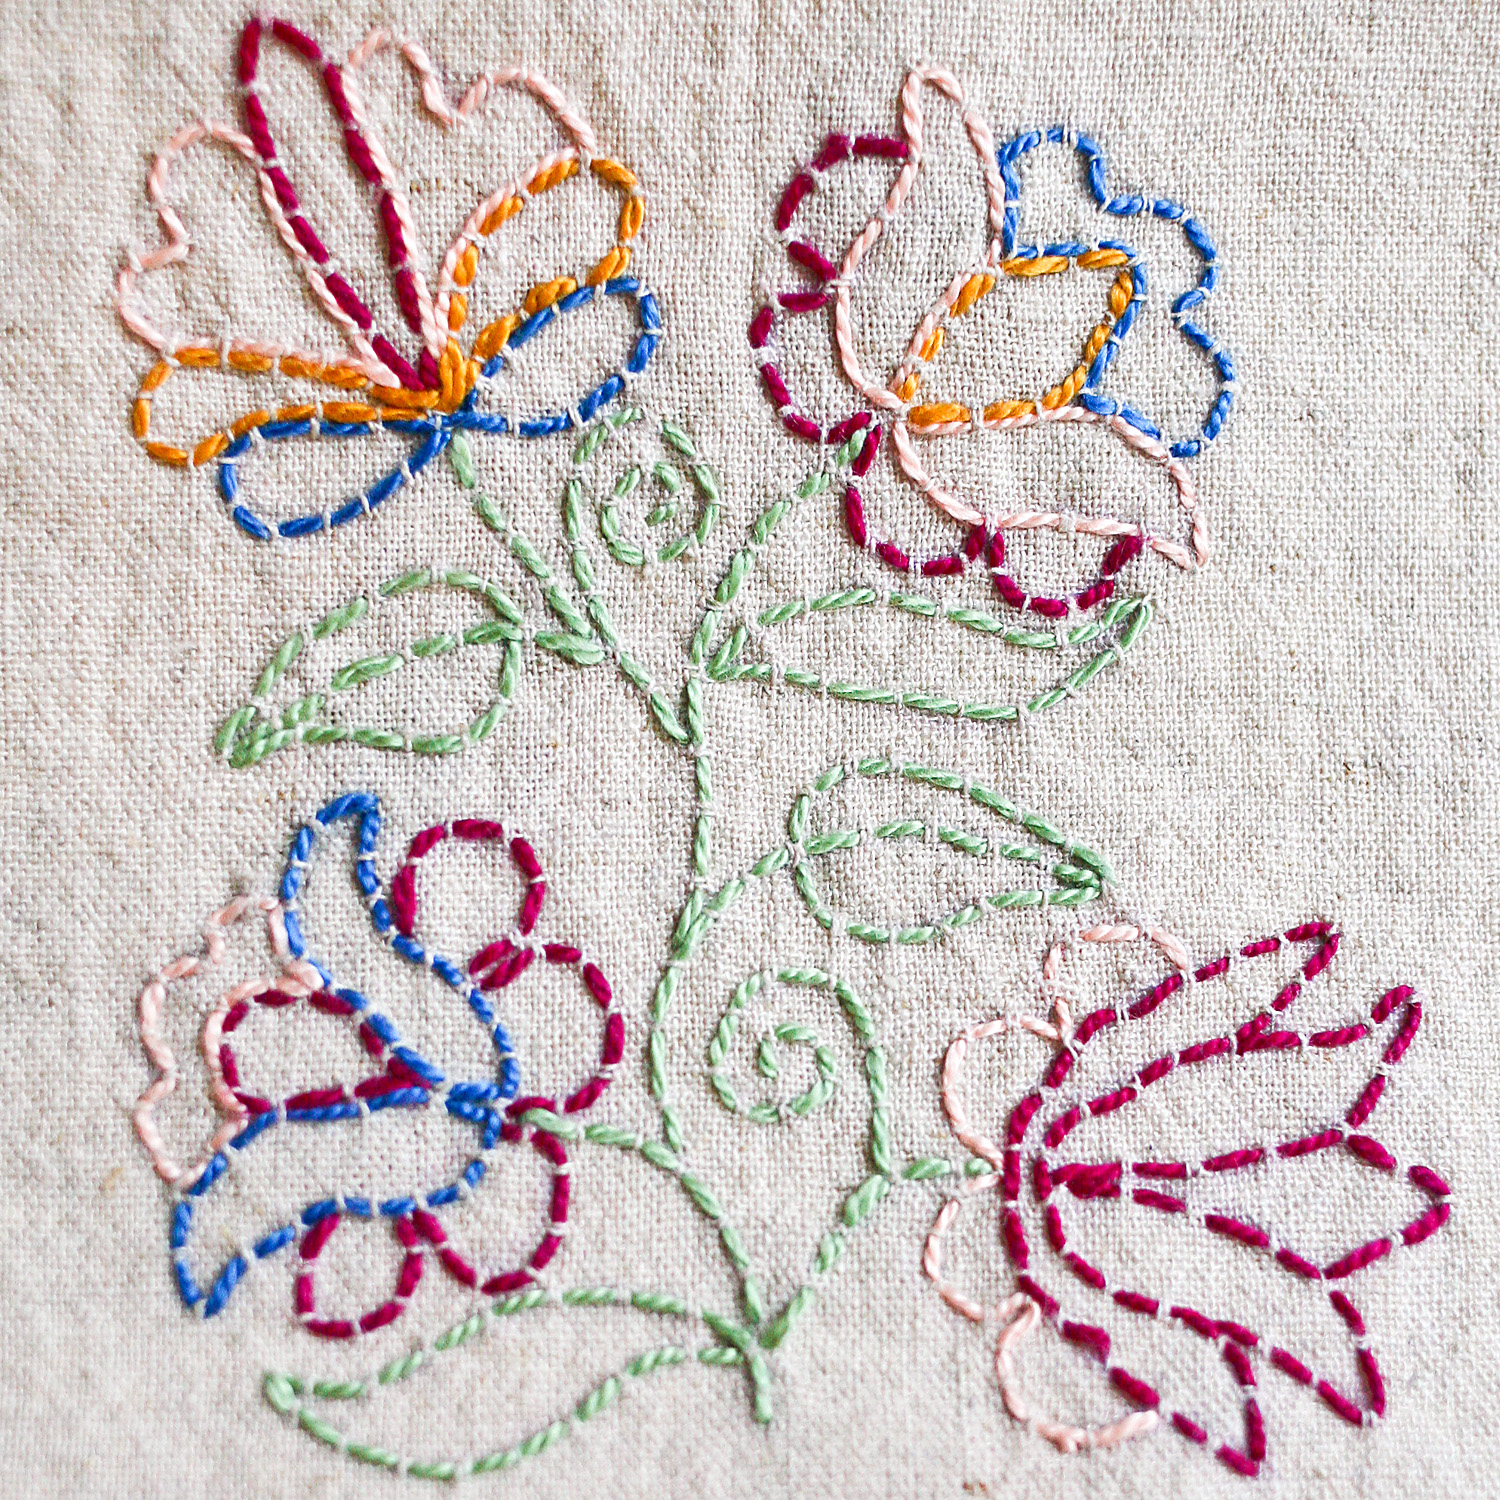 How To Make An Embroidery Pattern Outlining With Running Stitch A Tutorial Kate Rose